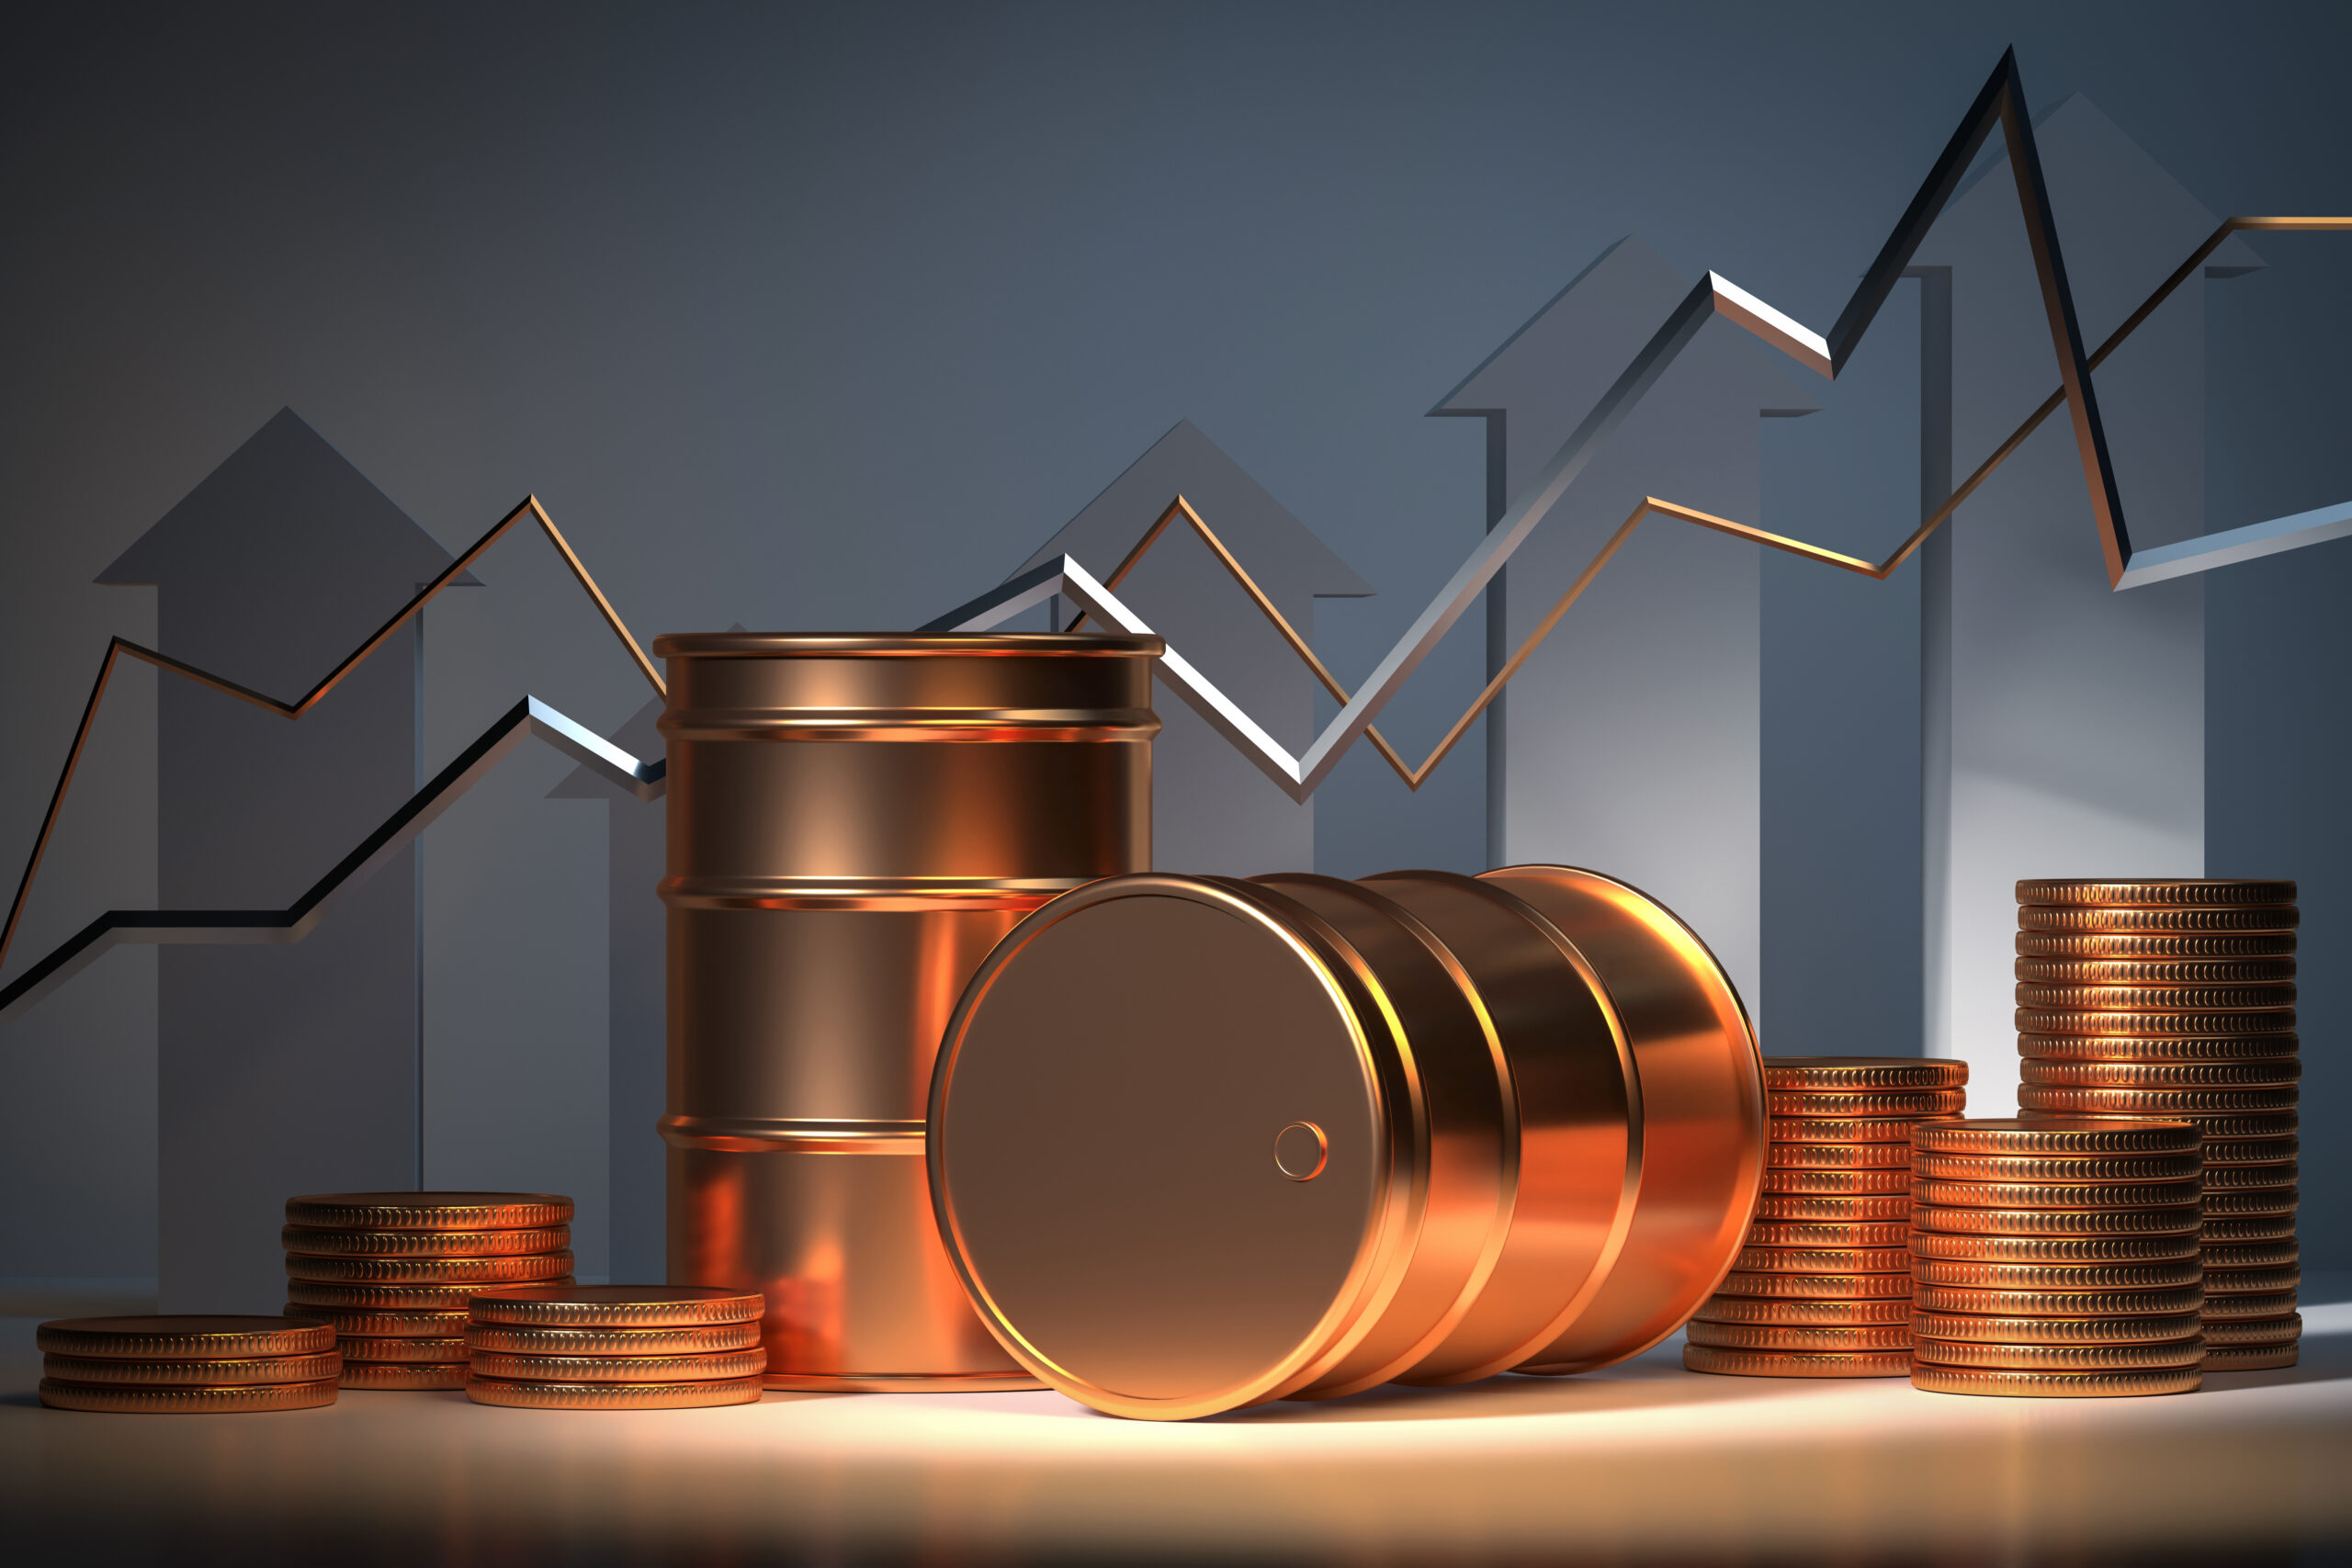 Oil-drums-stacked-coins-with-graph-in-the-background